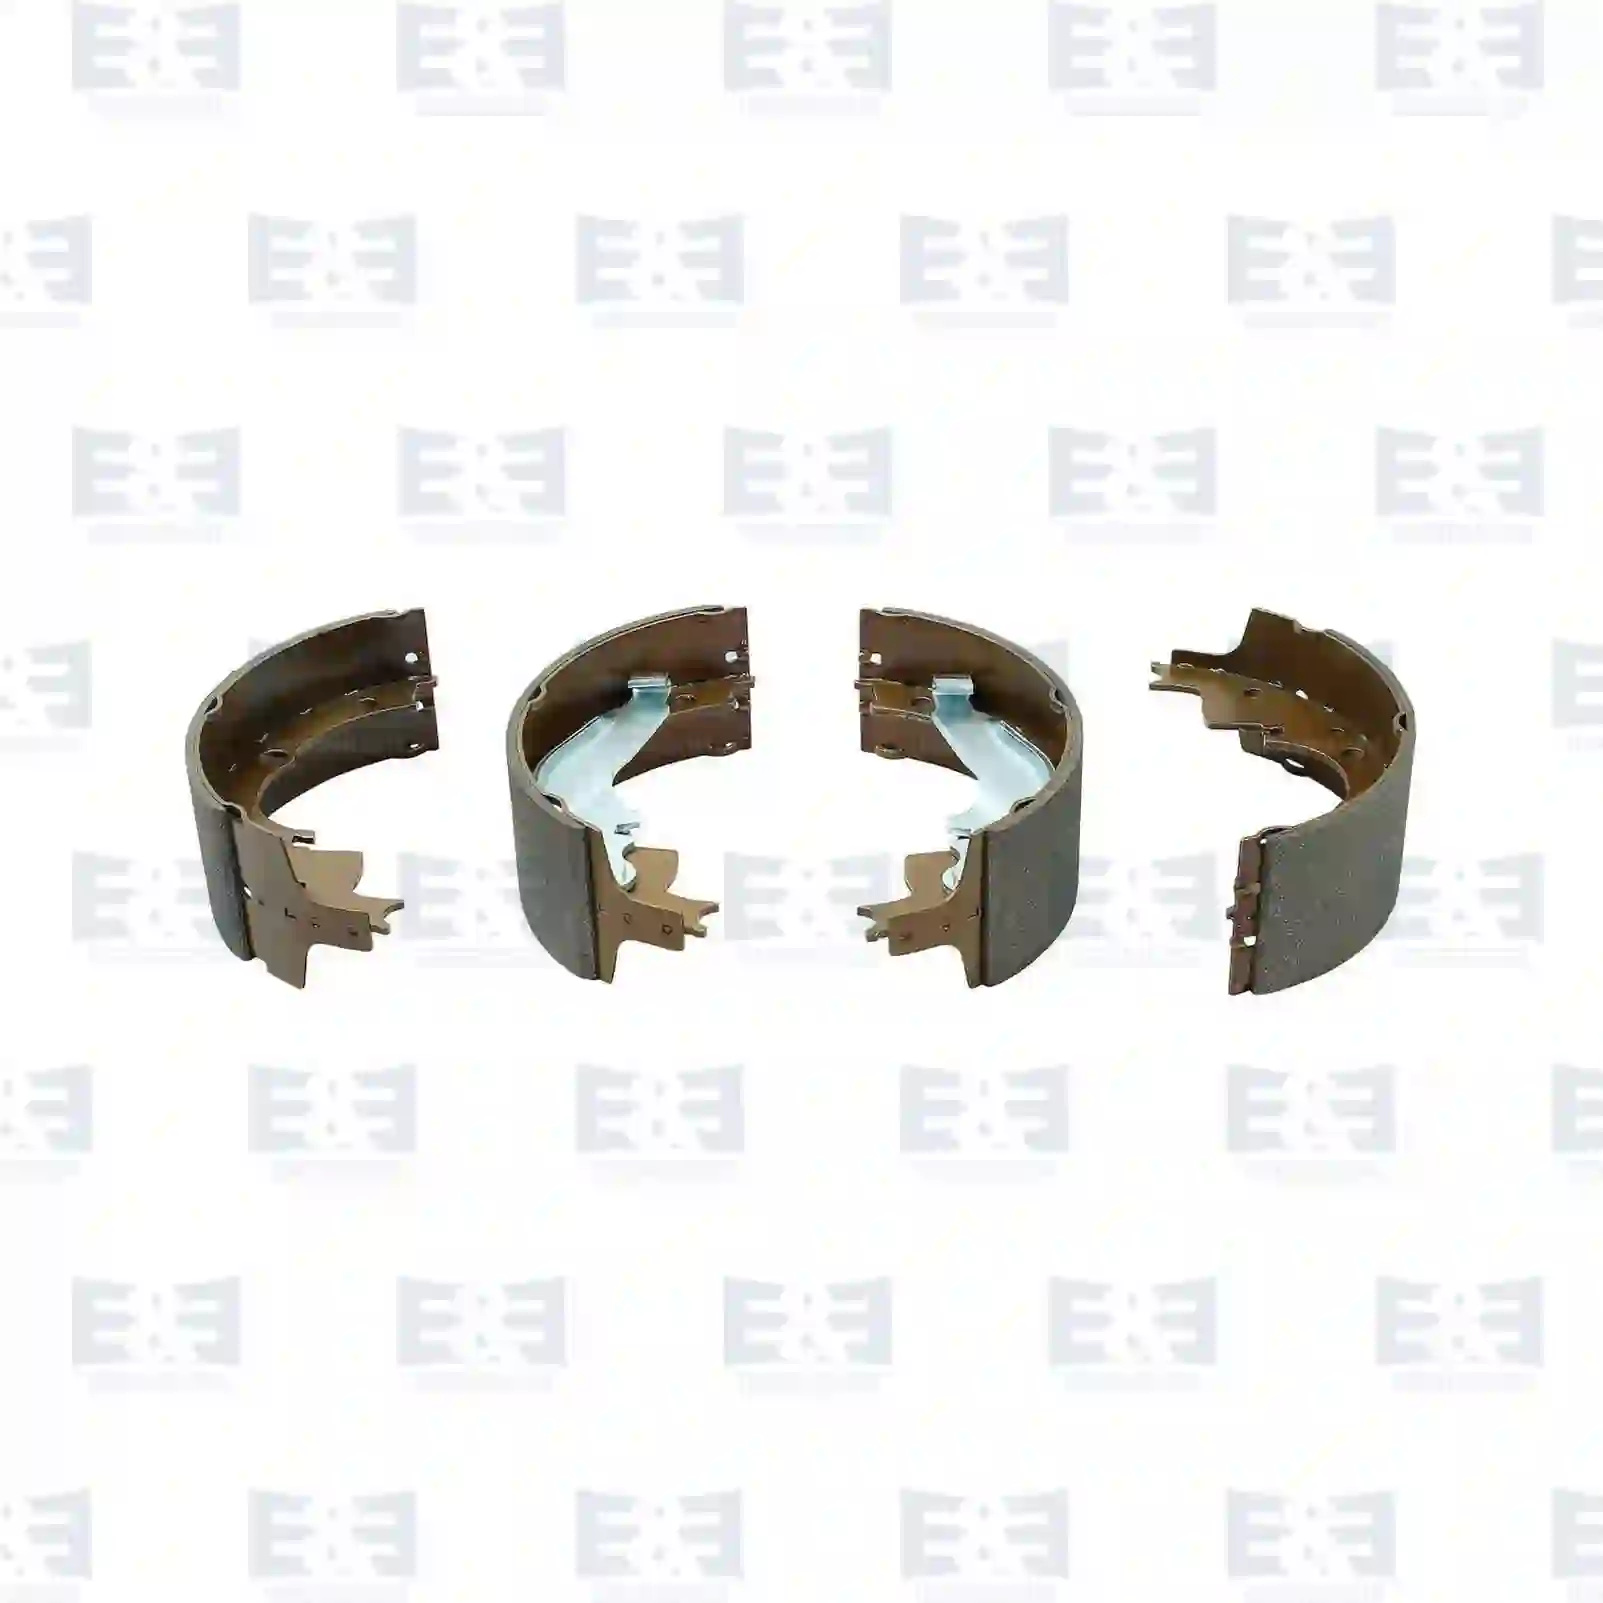 Brake Shoe Brake shoe kit, with linings, EE No 2E2295177 ,  oem no:01906151, 01906350, 05886042, 01906042, 01906172, 07981354, 01903489, 01906172, 01906350, 01906378, 01906379, 07981354, 08124270, 1906172, 1906350, 503641773, 7981354 E&E Truck Spare Parts | Truck Spare Parts, Auotomotive Spare Parts